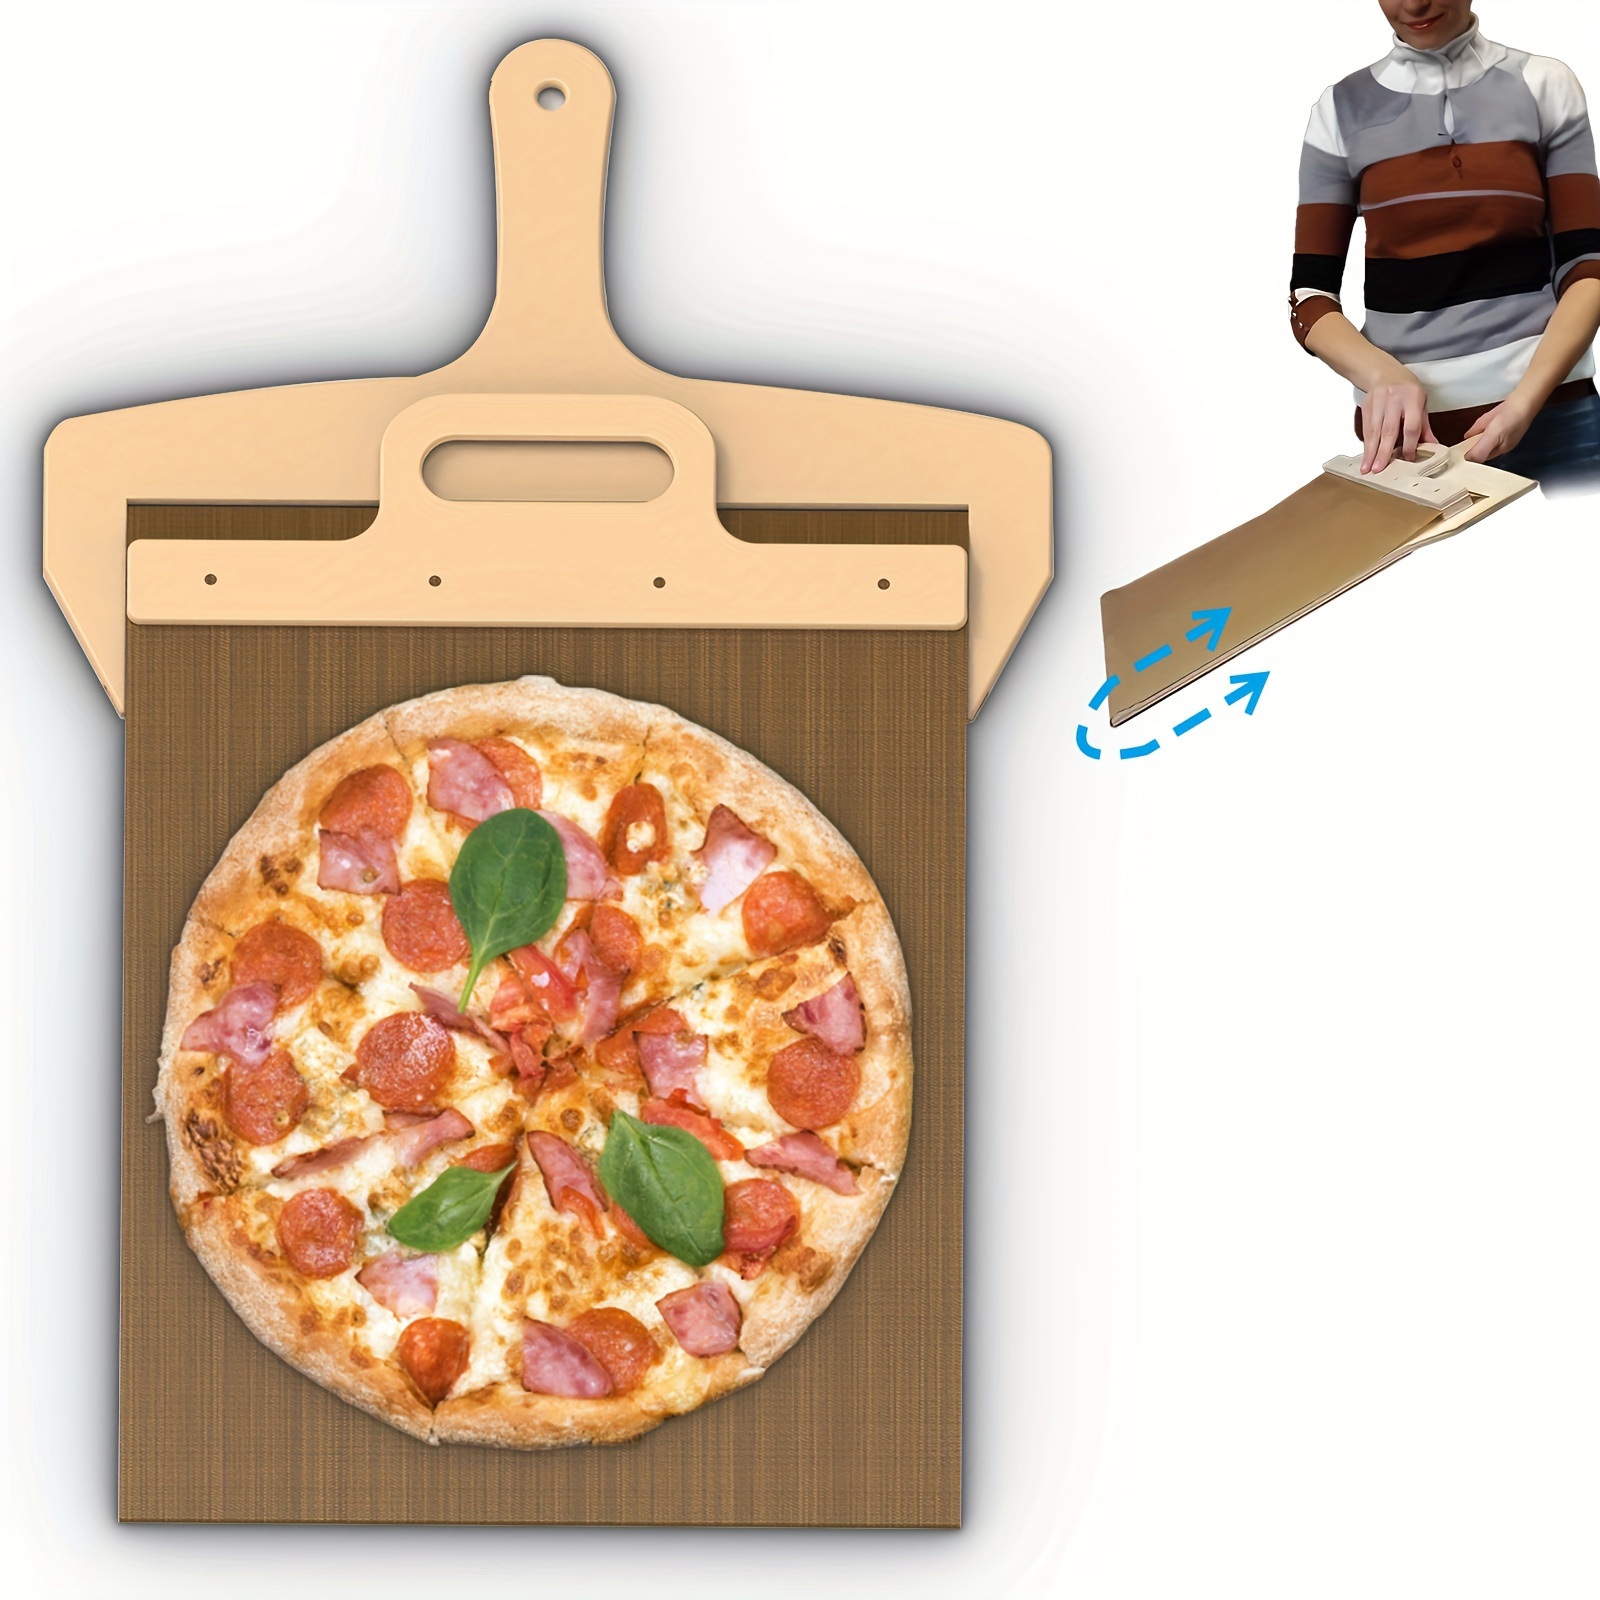 Sliding Pizza Peel - Pala-Pizza-Scorrevole, Pizza Peel Shovel with Handle,  Dishwasher Safe Pizza Peel, Pizza Spatula Paddle for Ovens, Non-stick,  Price $28. For USA. Interested DM me for Details : r/ReviewClub